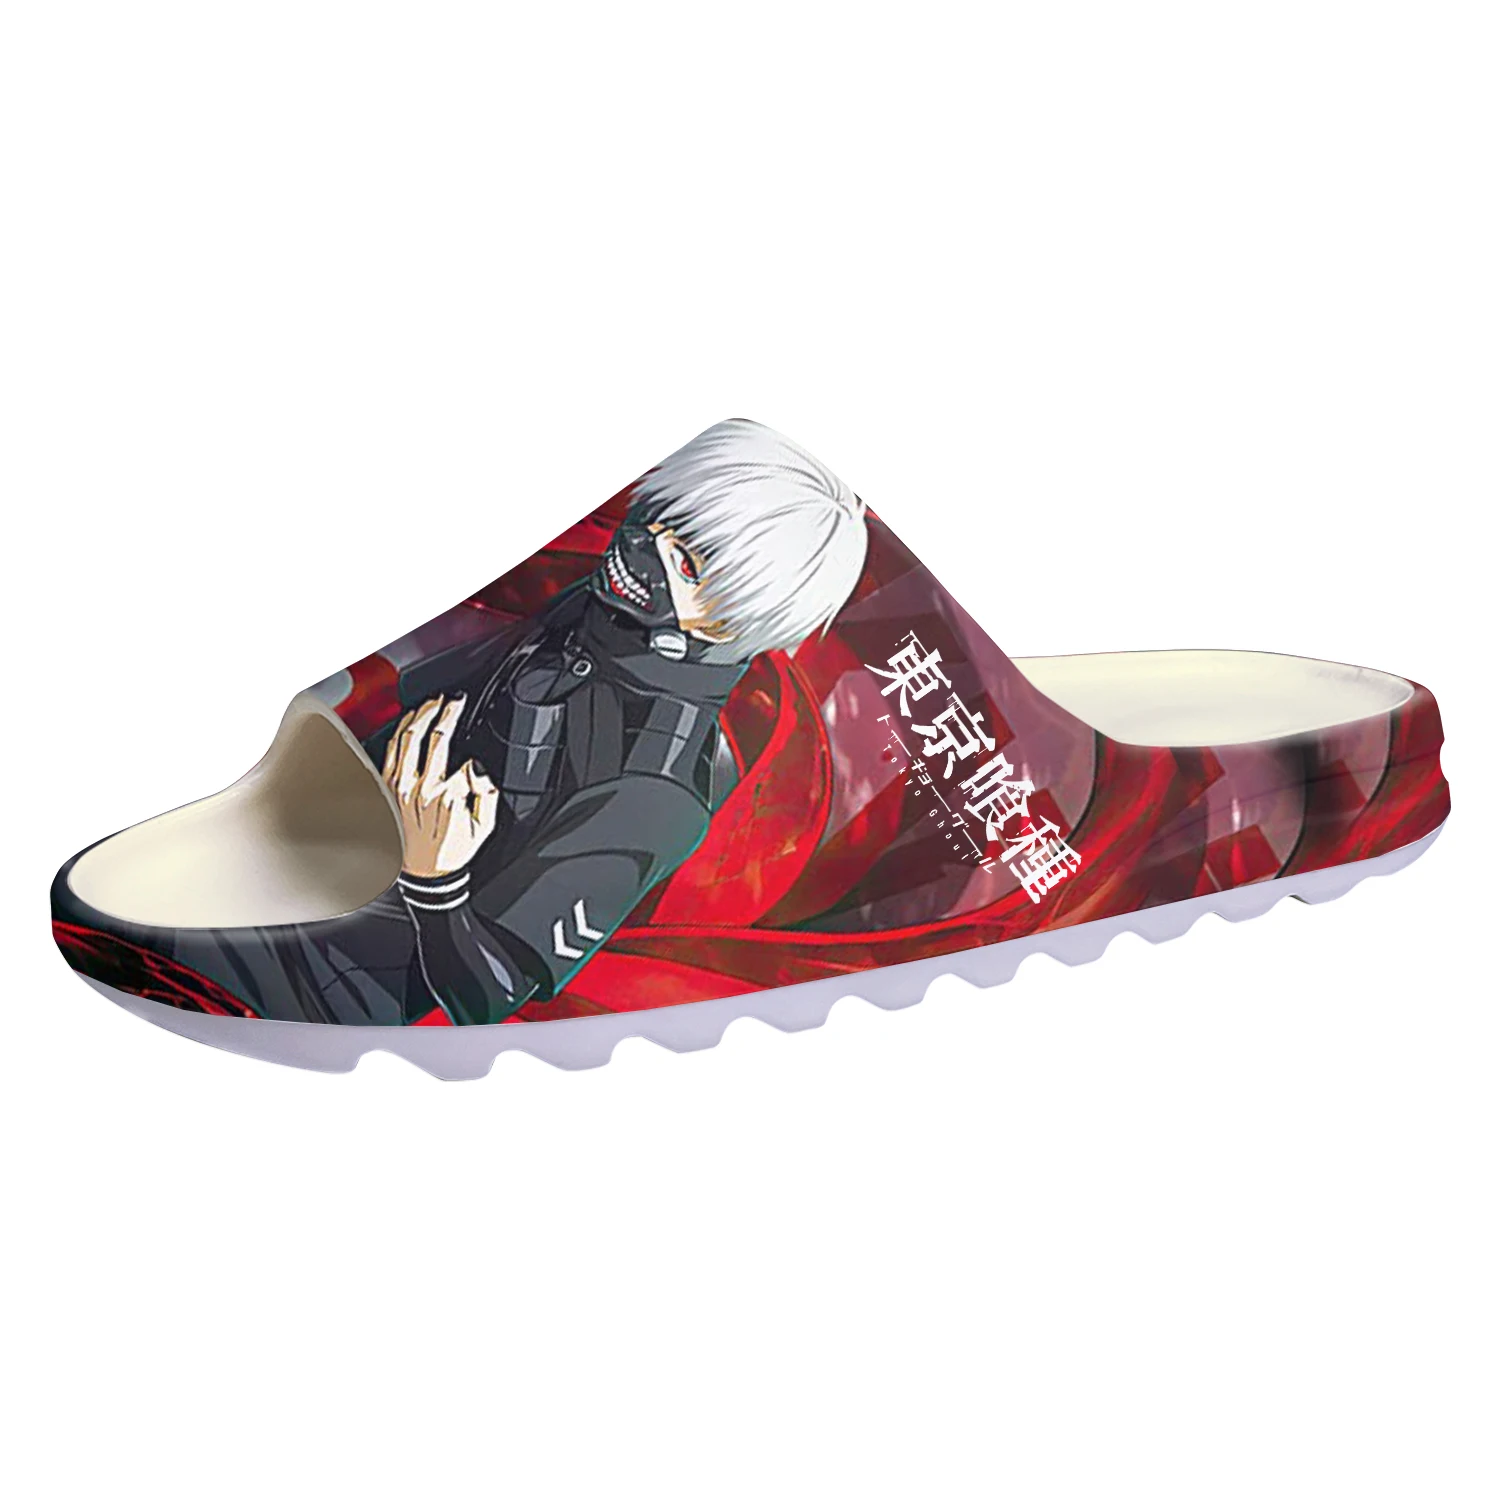 

Ken Kaneki Tokyo Ghoul Anime Soft Sole Sllipers Home Clogs Customized Water Shoes Men Women Teenager Step on Shit Sandals